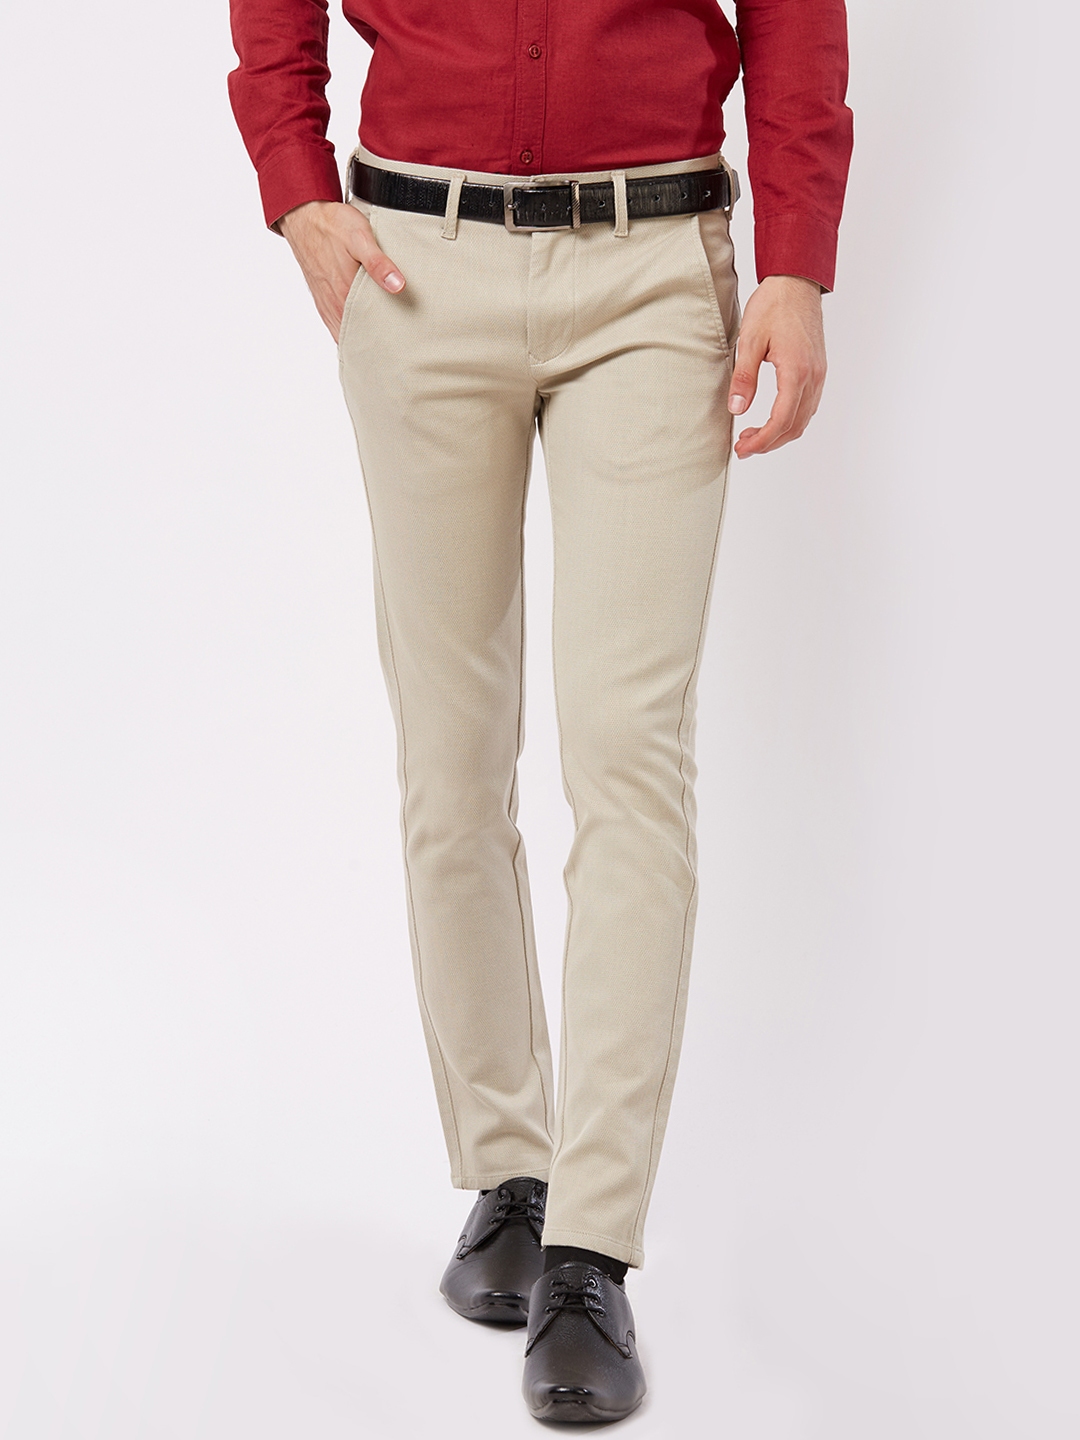 Beige trousers for men with side pockets  Exibit